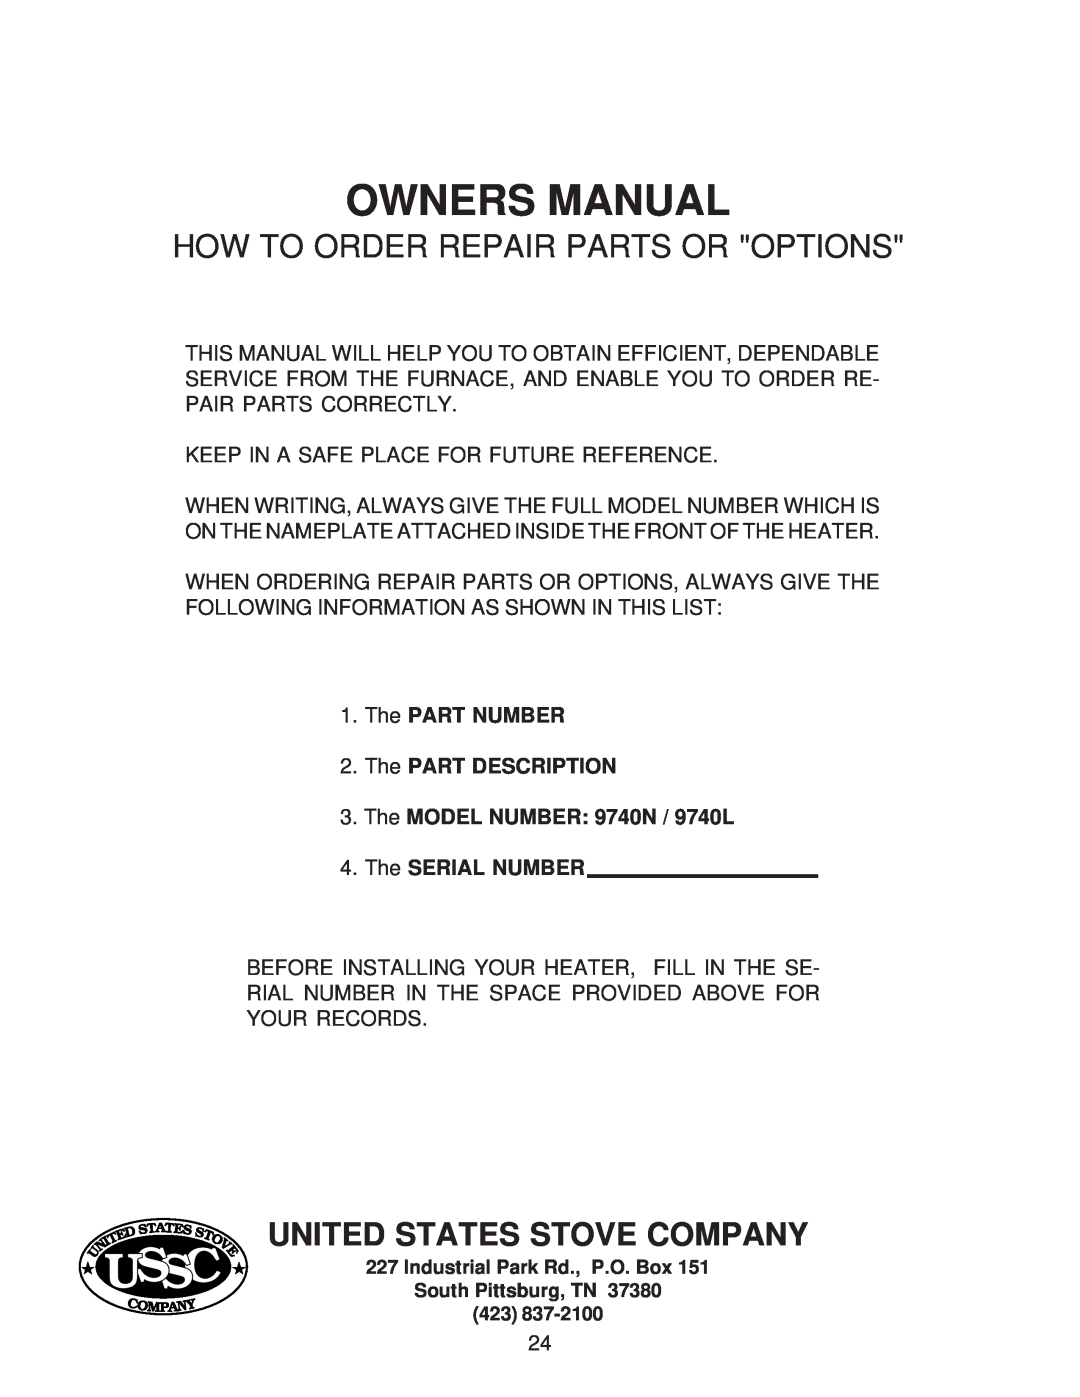 United States Stove G9740L United States Stove Company, Ussc, How To Order Repair Parts Or Options, The SERIAL NUMBER 